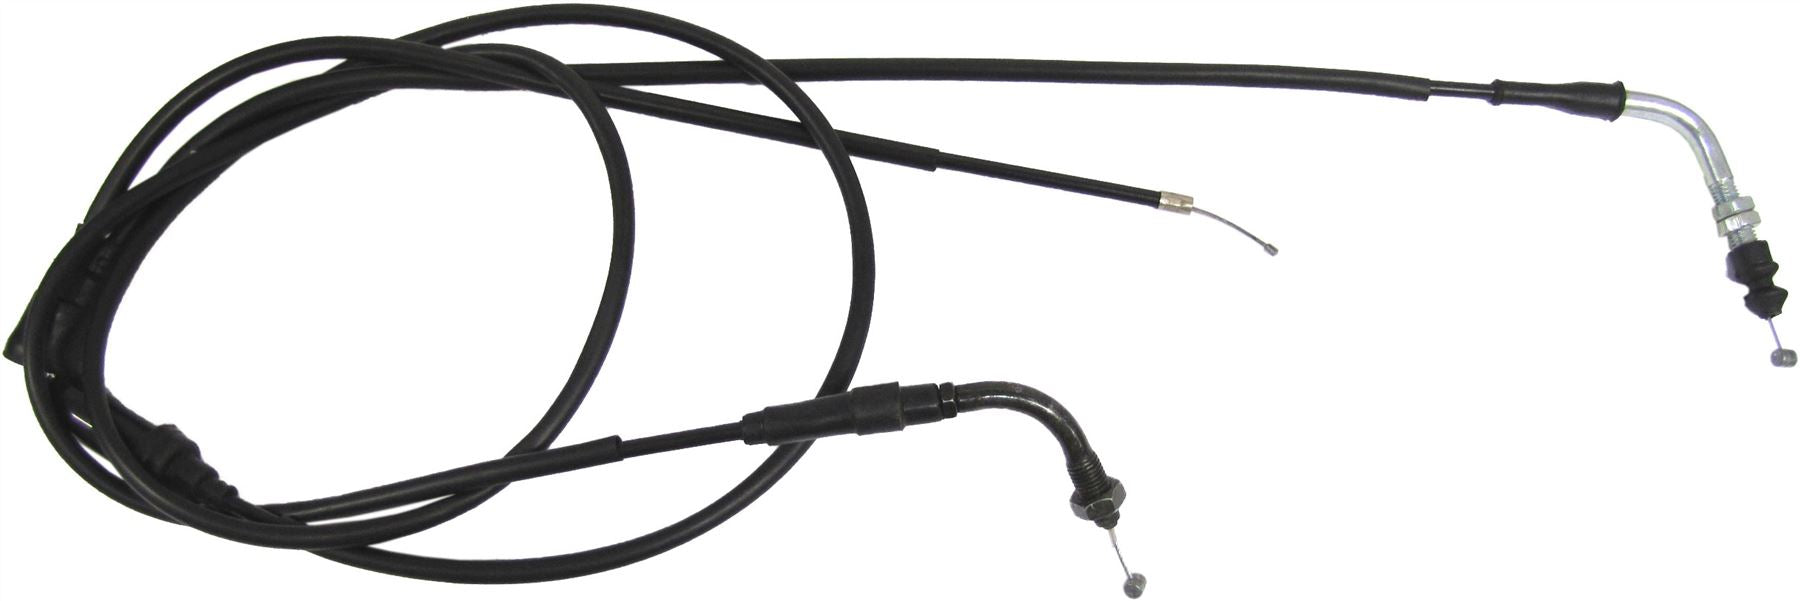 Honda SFX 50 Throttle Cable or Pull Cable 1995-2001